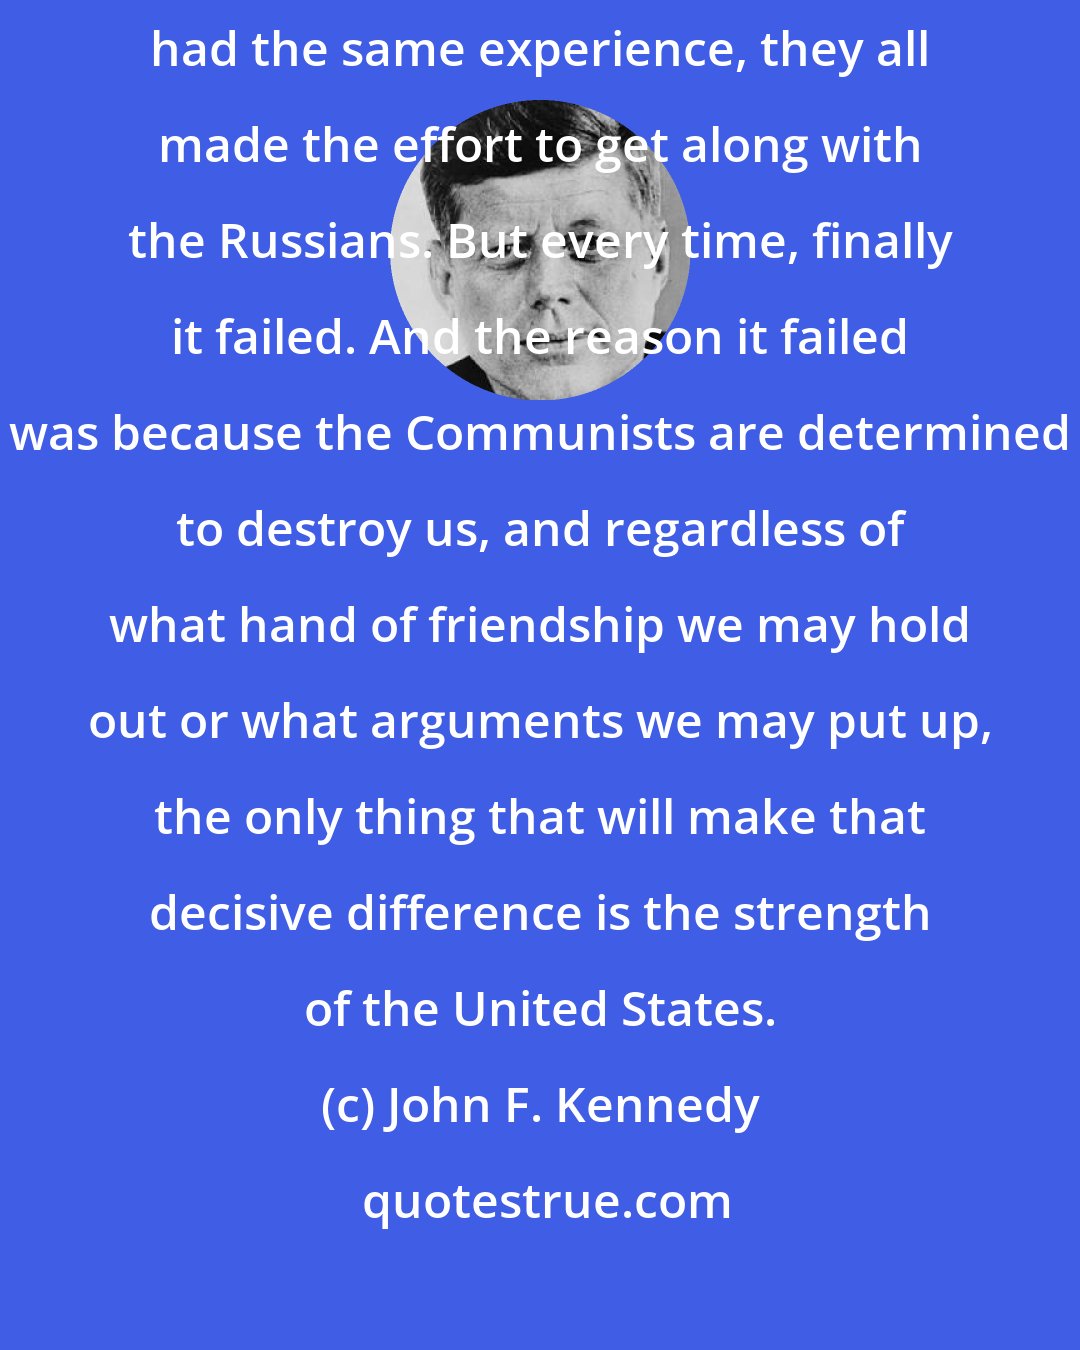 John F. Kennedy: President Roosevelt and President Truman and President Eisenhower had the same experience, they all made the effort to get along with the Russians. But every time, finally it failed. And the reason it failed was because the Communists are determined to destroy us, and regardless of what hand of friendship we may hold out or what arguments we may put up, the only thing that will make that decisive difference is the strength of the United States.